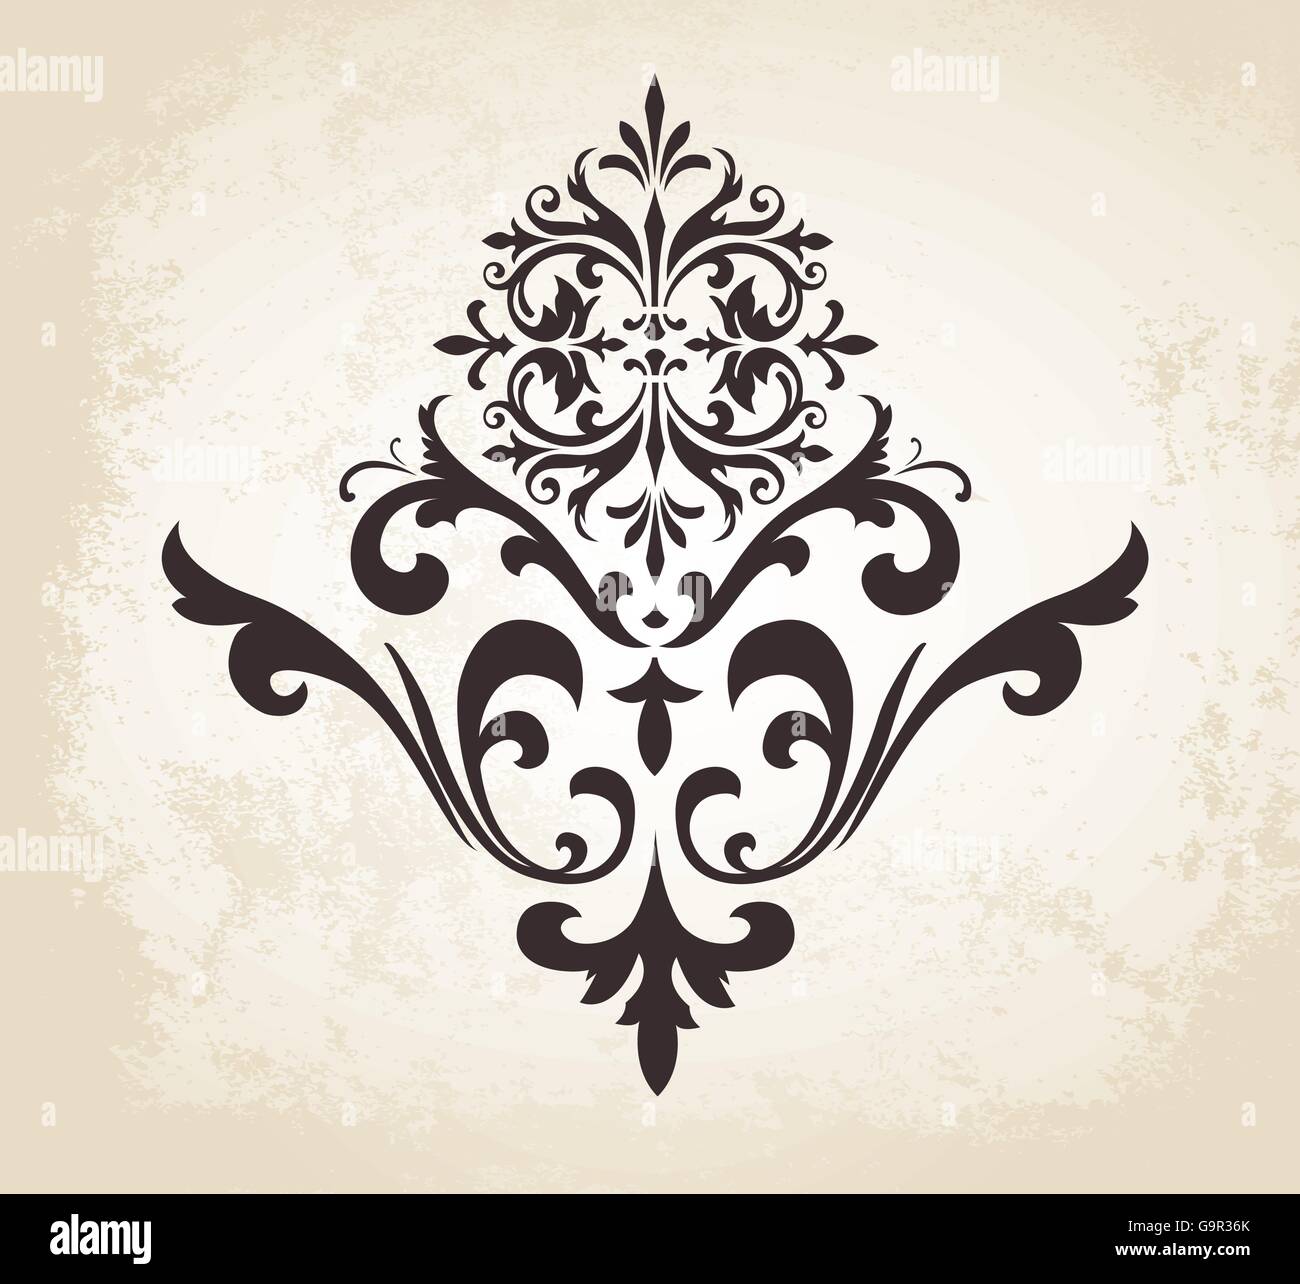 This image is a vector file representing a Vintage Vector Decorative Ornament. Stock Vector